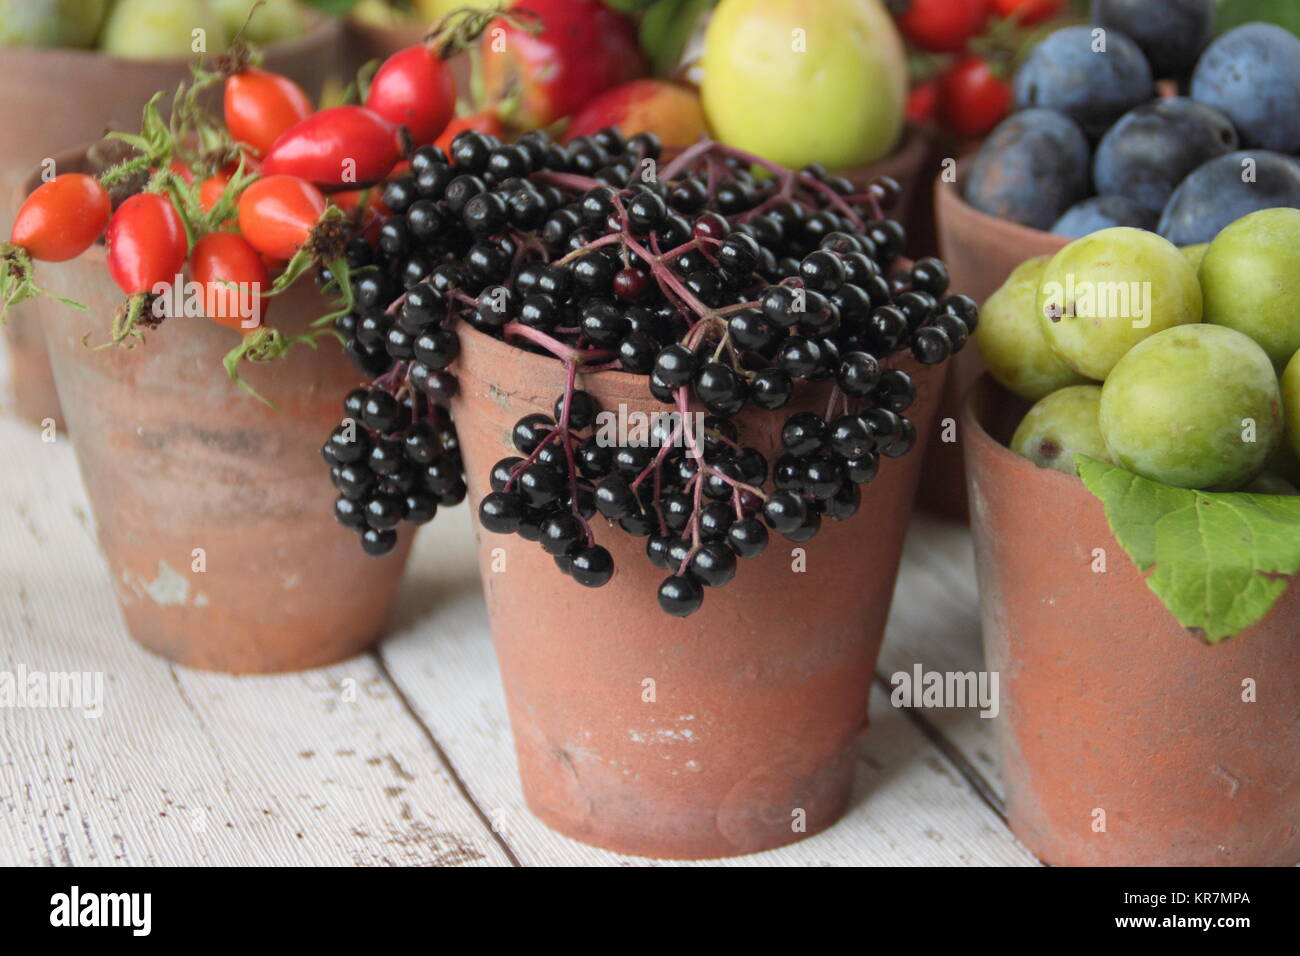 Autumn fruits and berries (elderberries, blackberries, sloes, crabapples, and green plums) foraged from English hedgerows, displayed in clay pots, UK Stock Photo